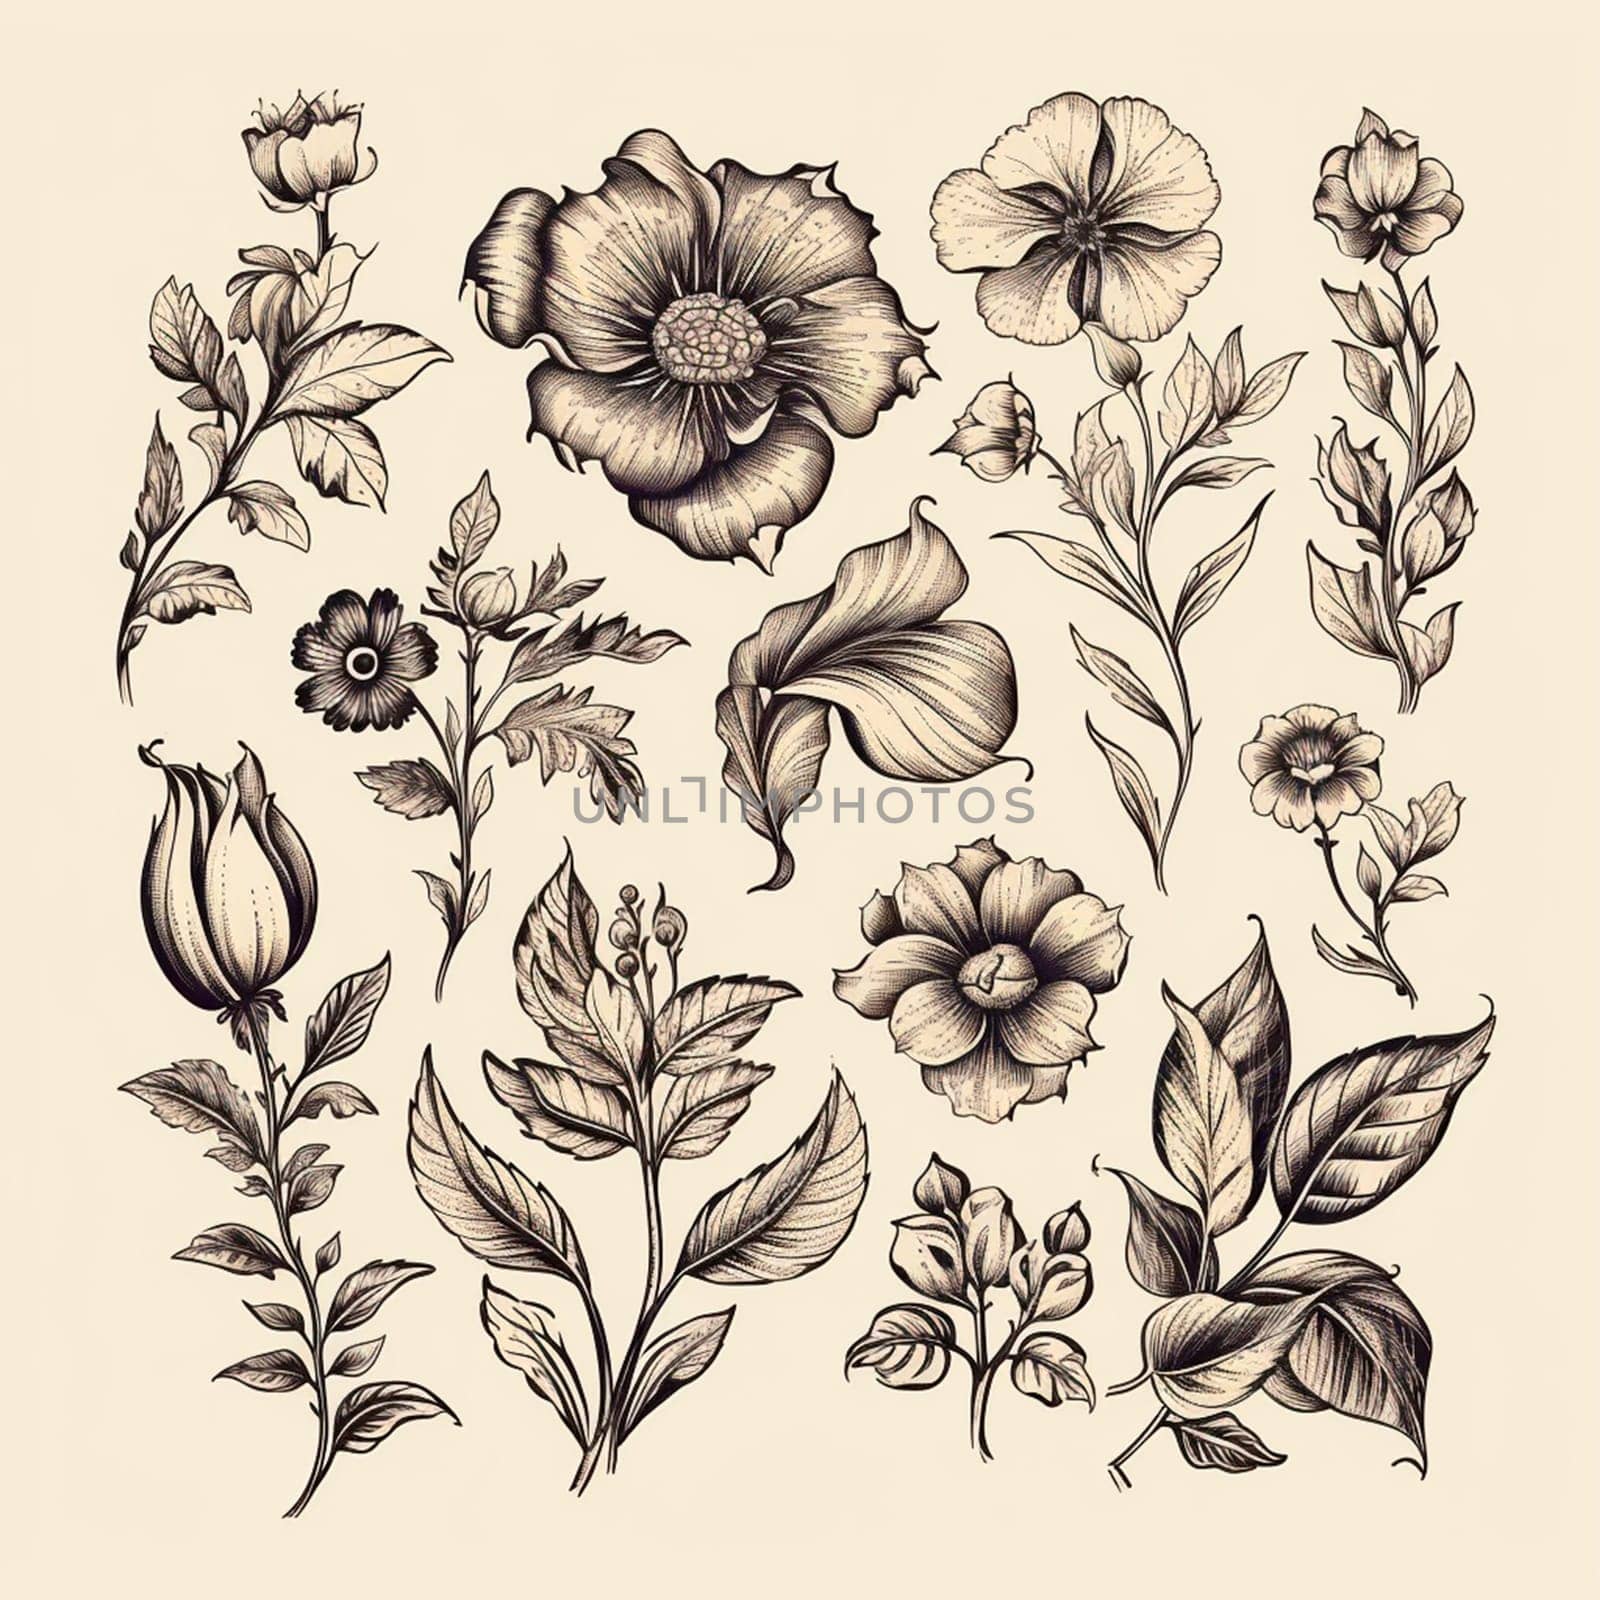 Black and white drawings of flowers and plants, hand drawings - image